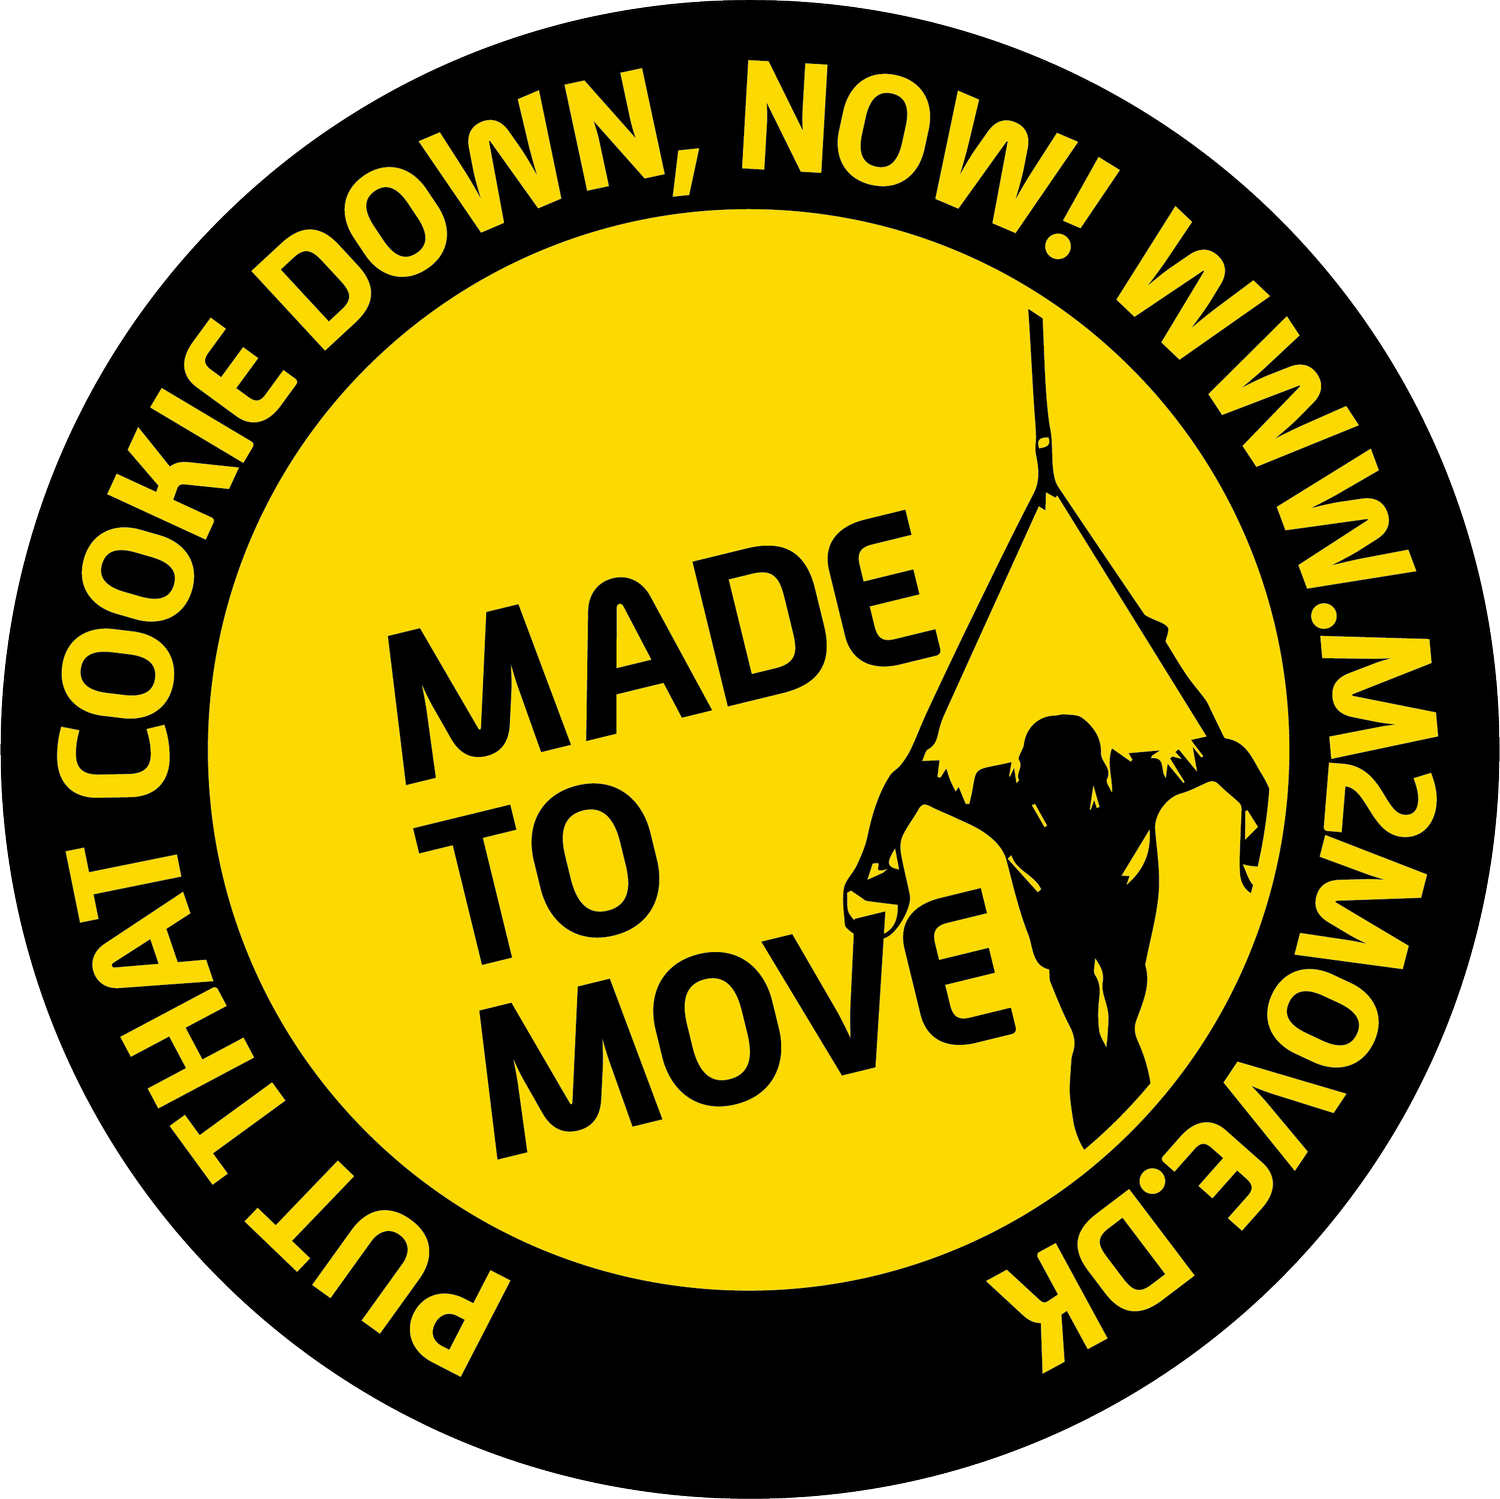 MADE TO MOVE